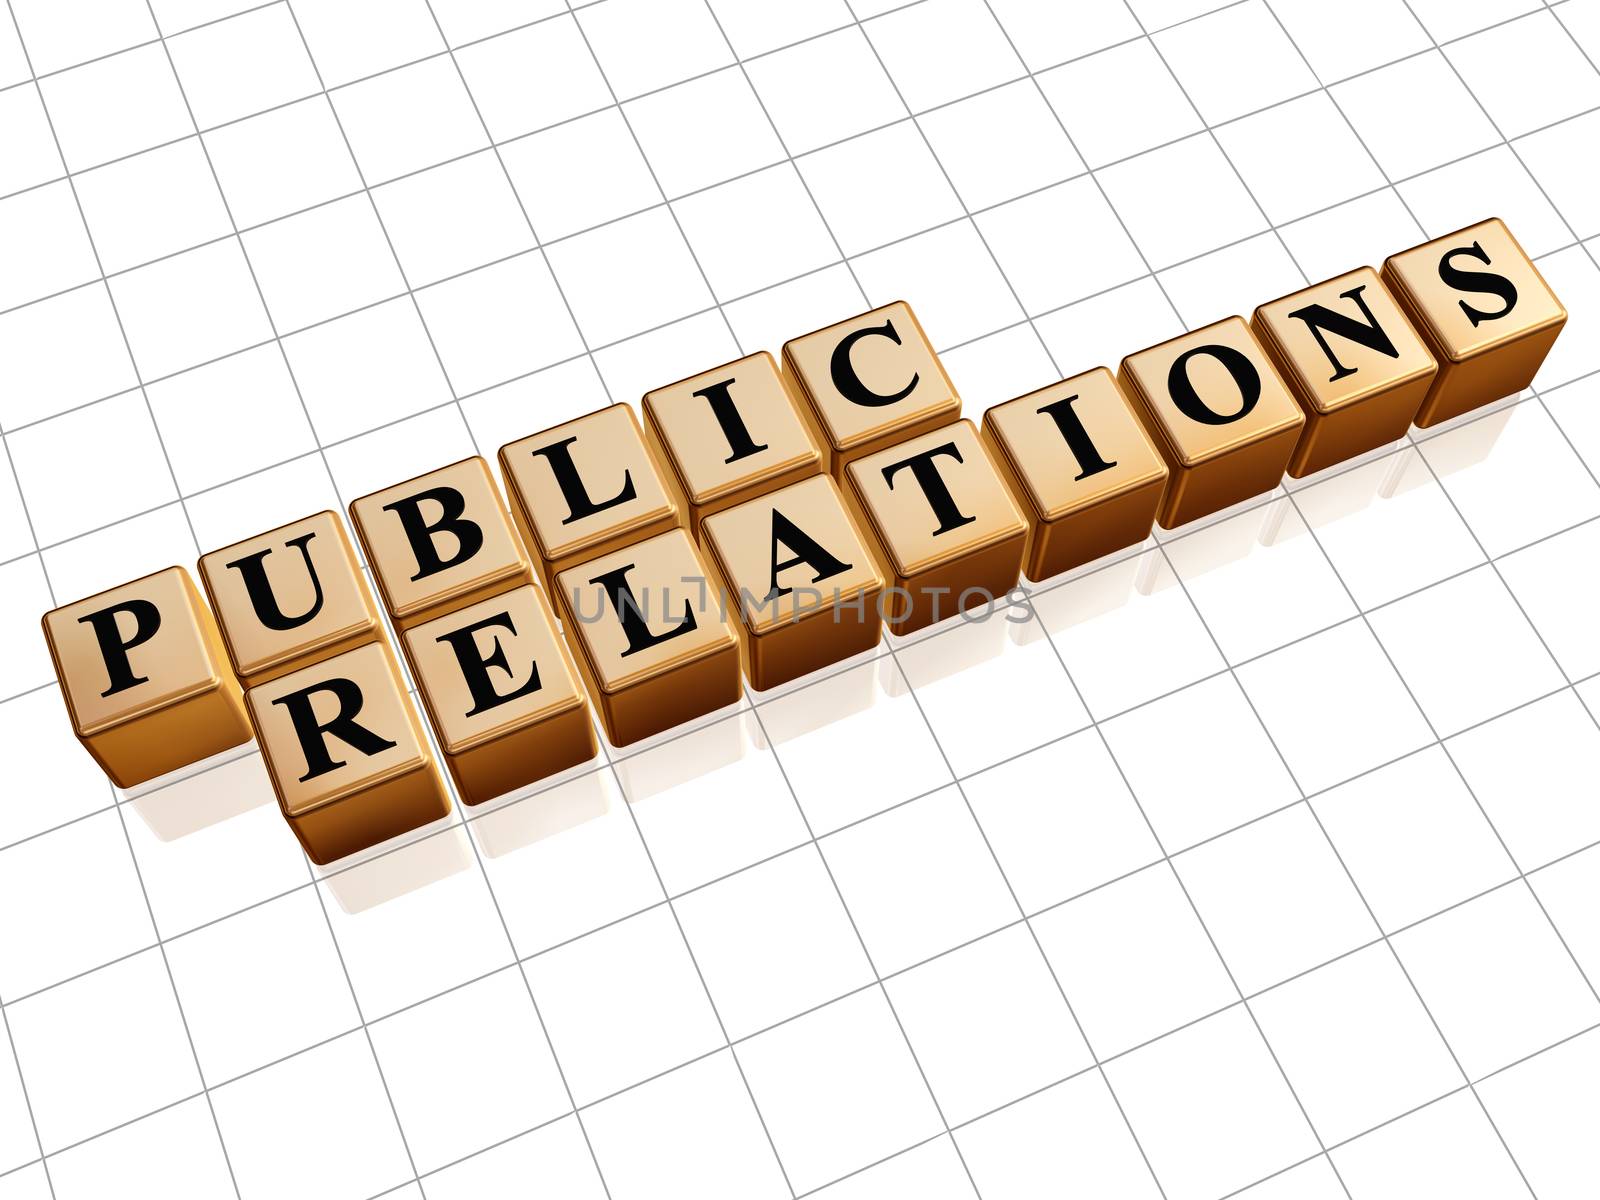 public relations in golden cubes by marinini